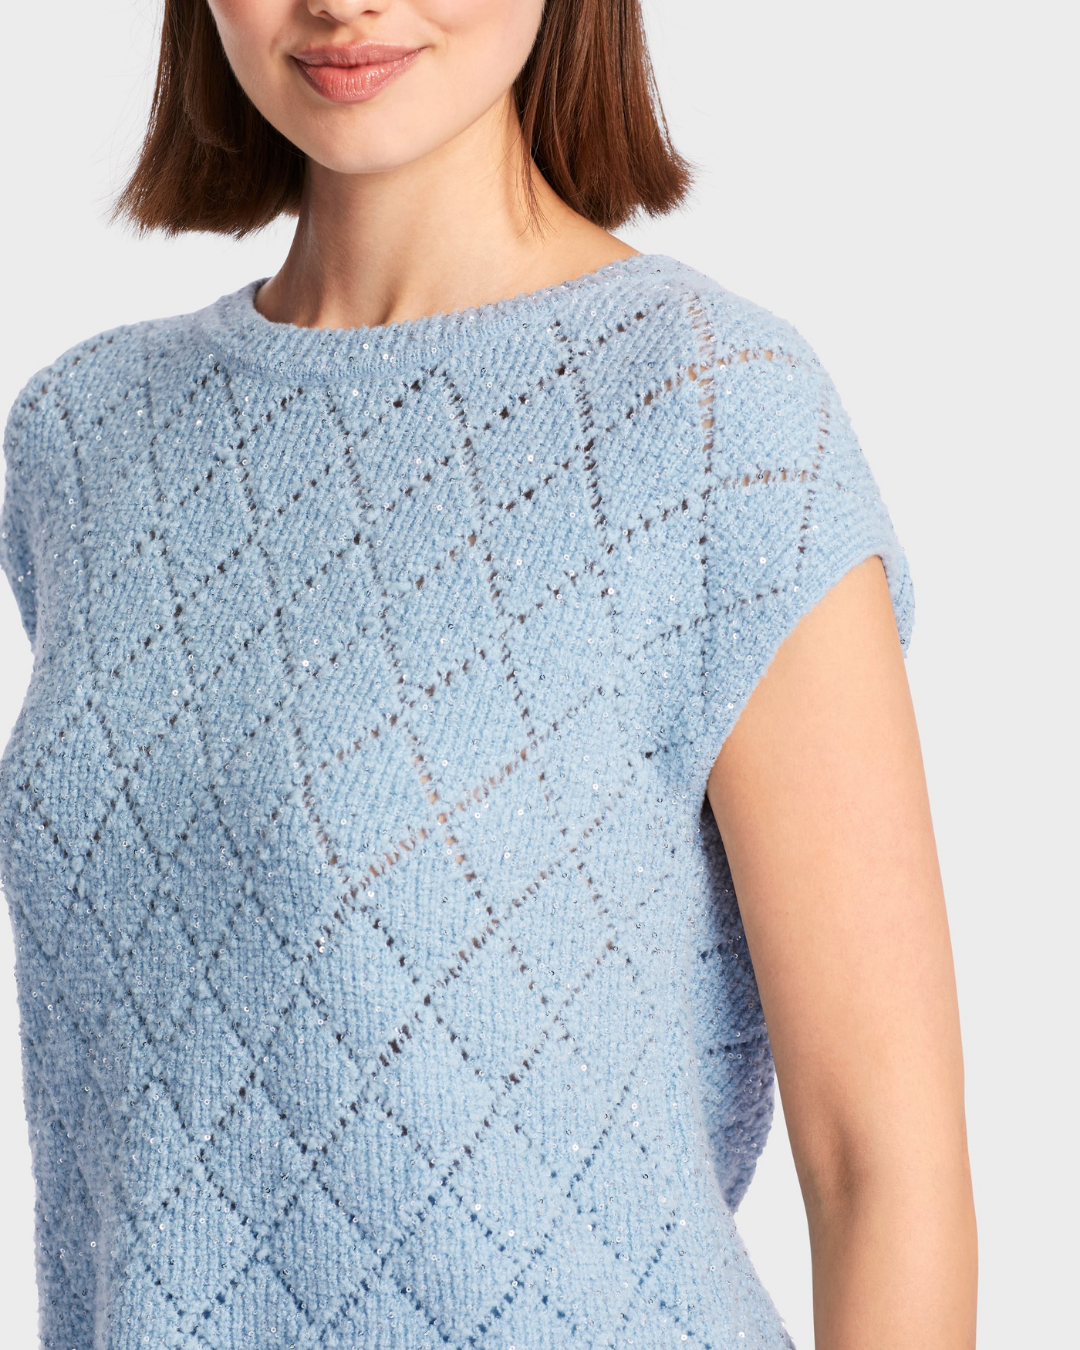 Diamond pullover Knitted in Germany